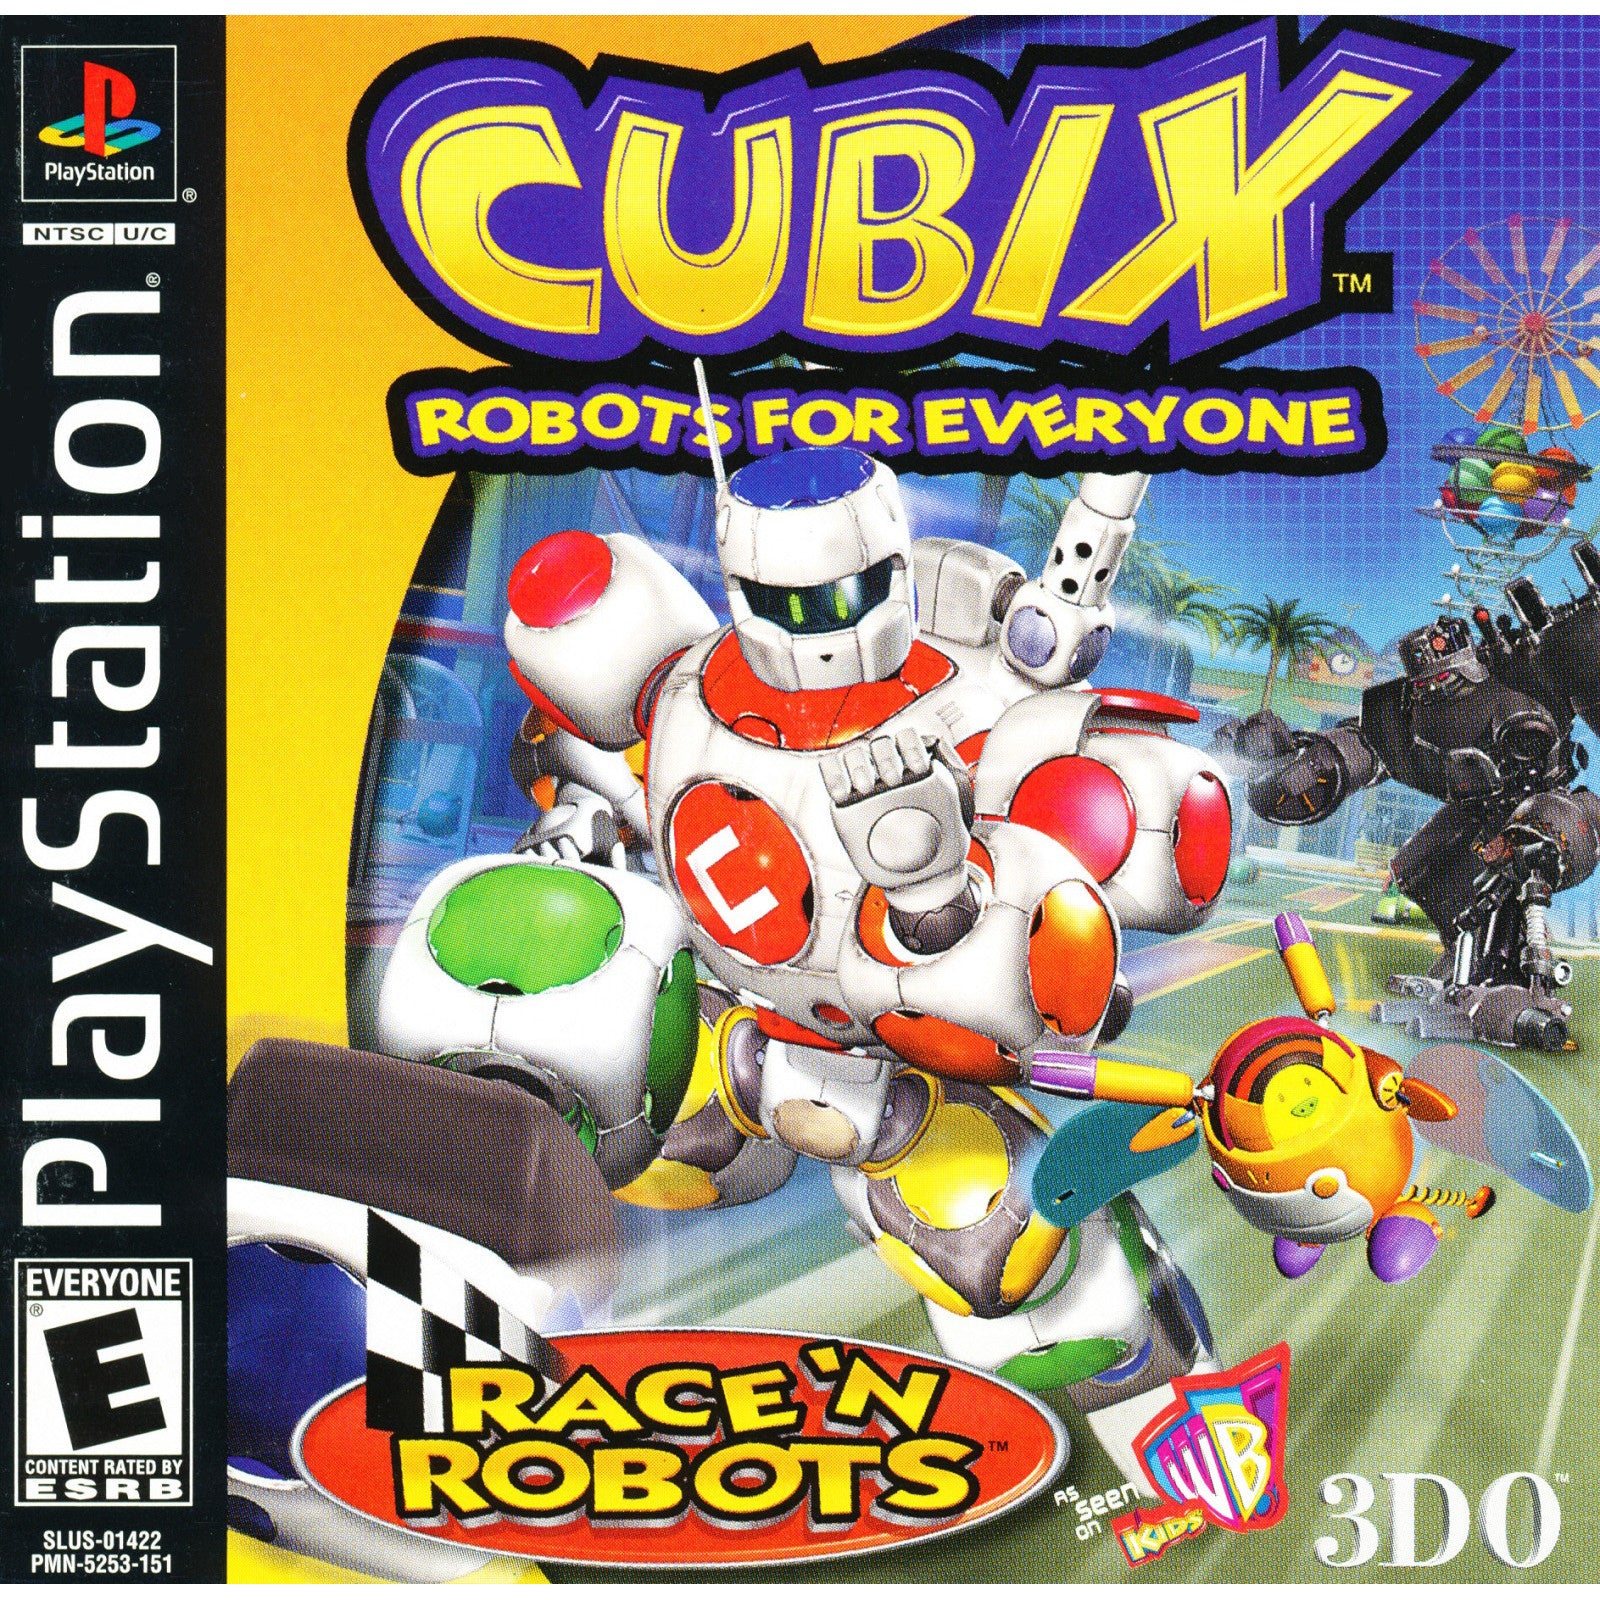 Cubix Robots for Everyone for PlayStation 1